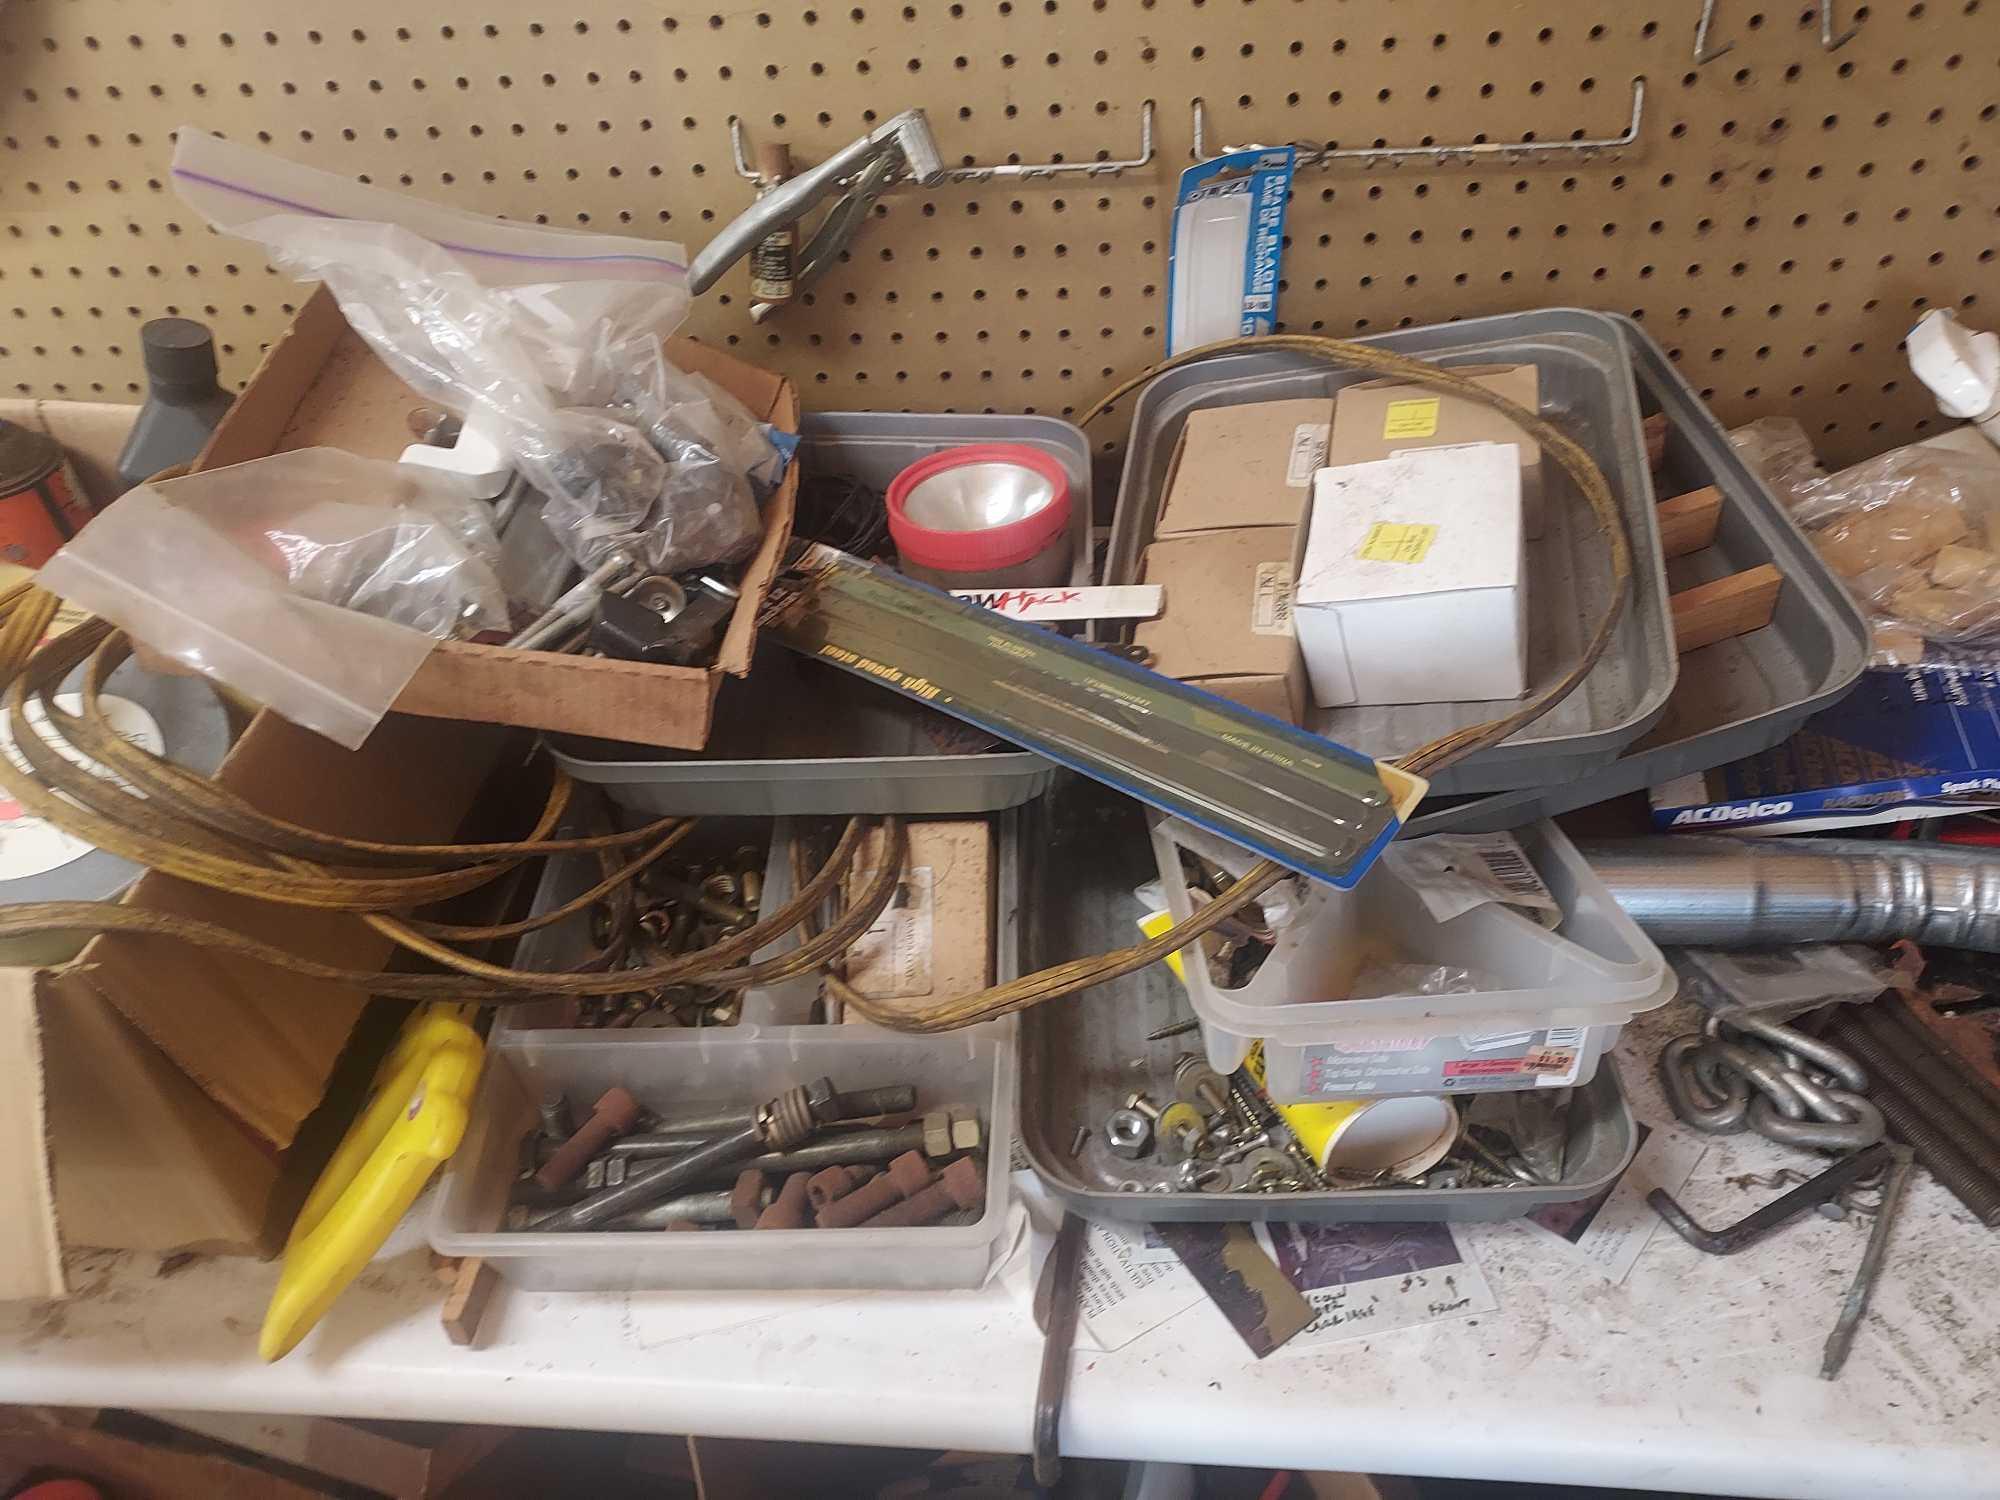 Contents On & Below Workbench - Sprays, Oils, Metal Pieces, Hardware, & more